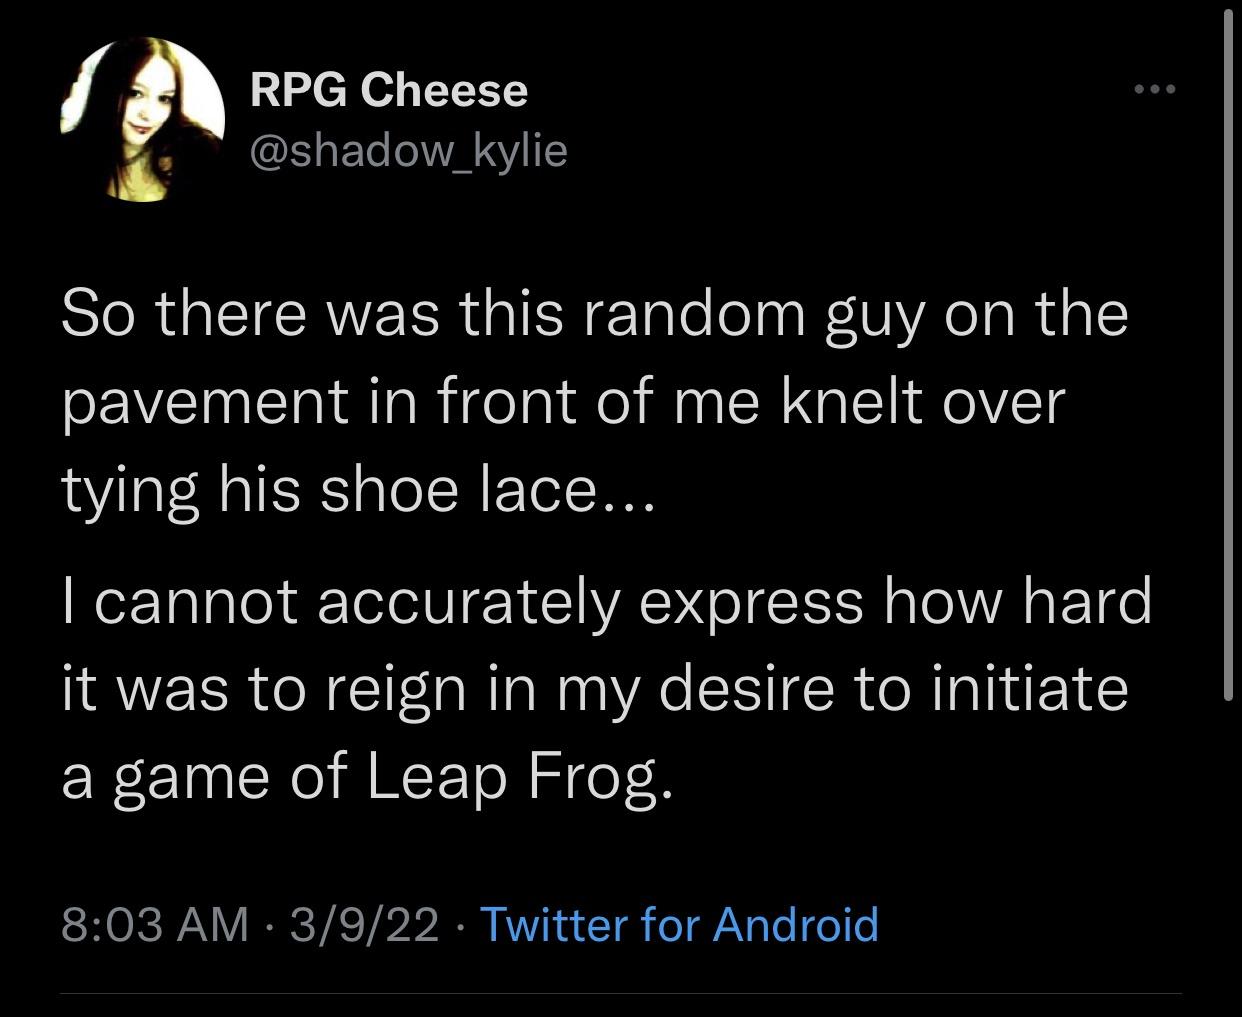 cool random pics - cool pics and memes screenshot - ... Rpg Cheese So there was this random guy on the pavement in front of me knelt over tying his shoe lace... I cannot accurately express how hard it was to reign in my desire to initiate a game of Leap F